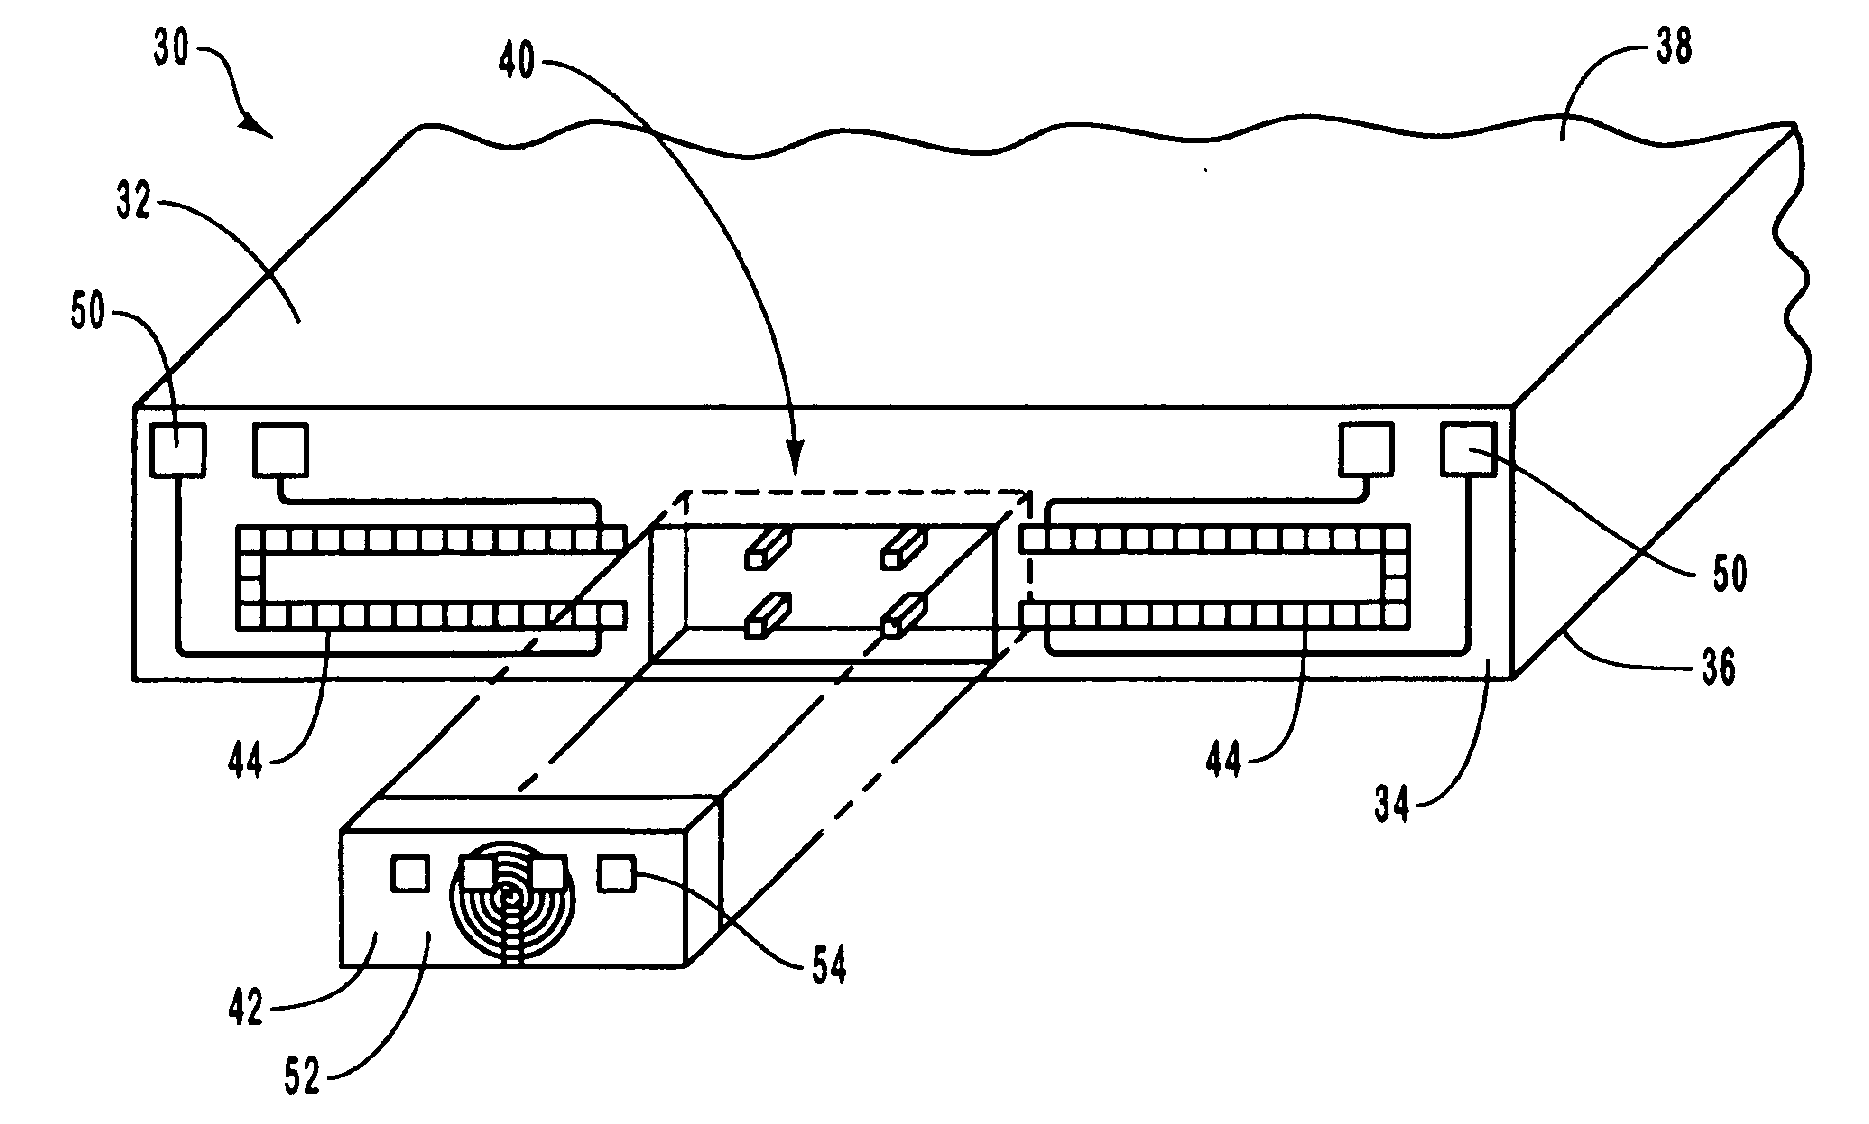 Integrated bidirectional Recording head micropositioner for magnetic storage devices